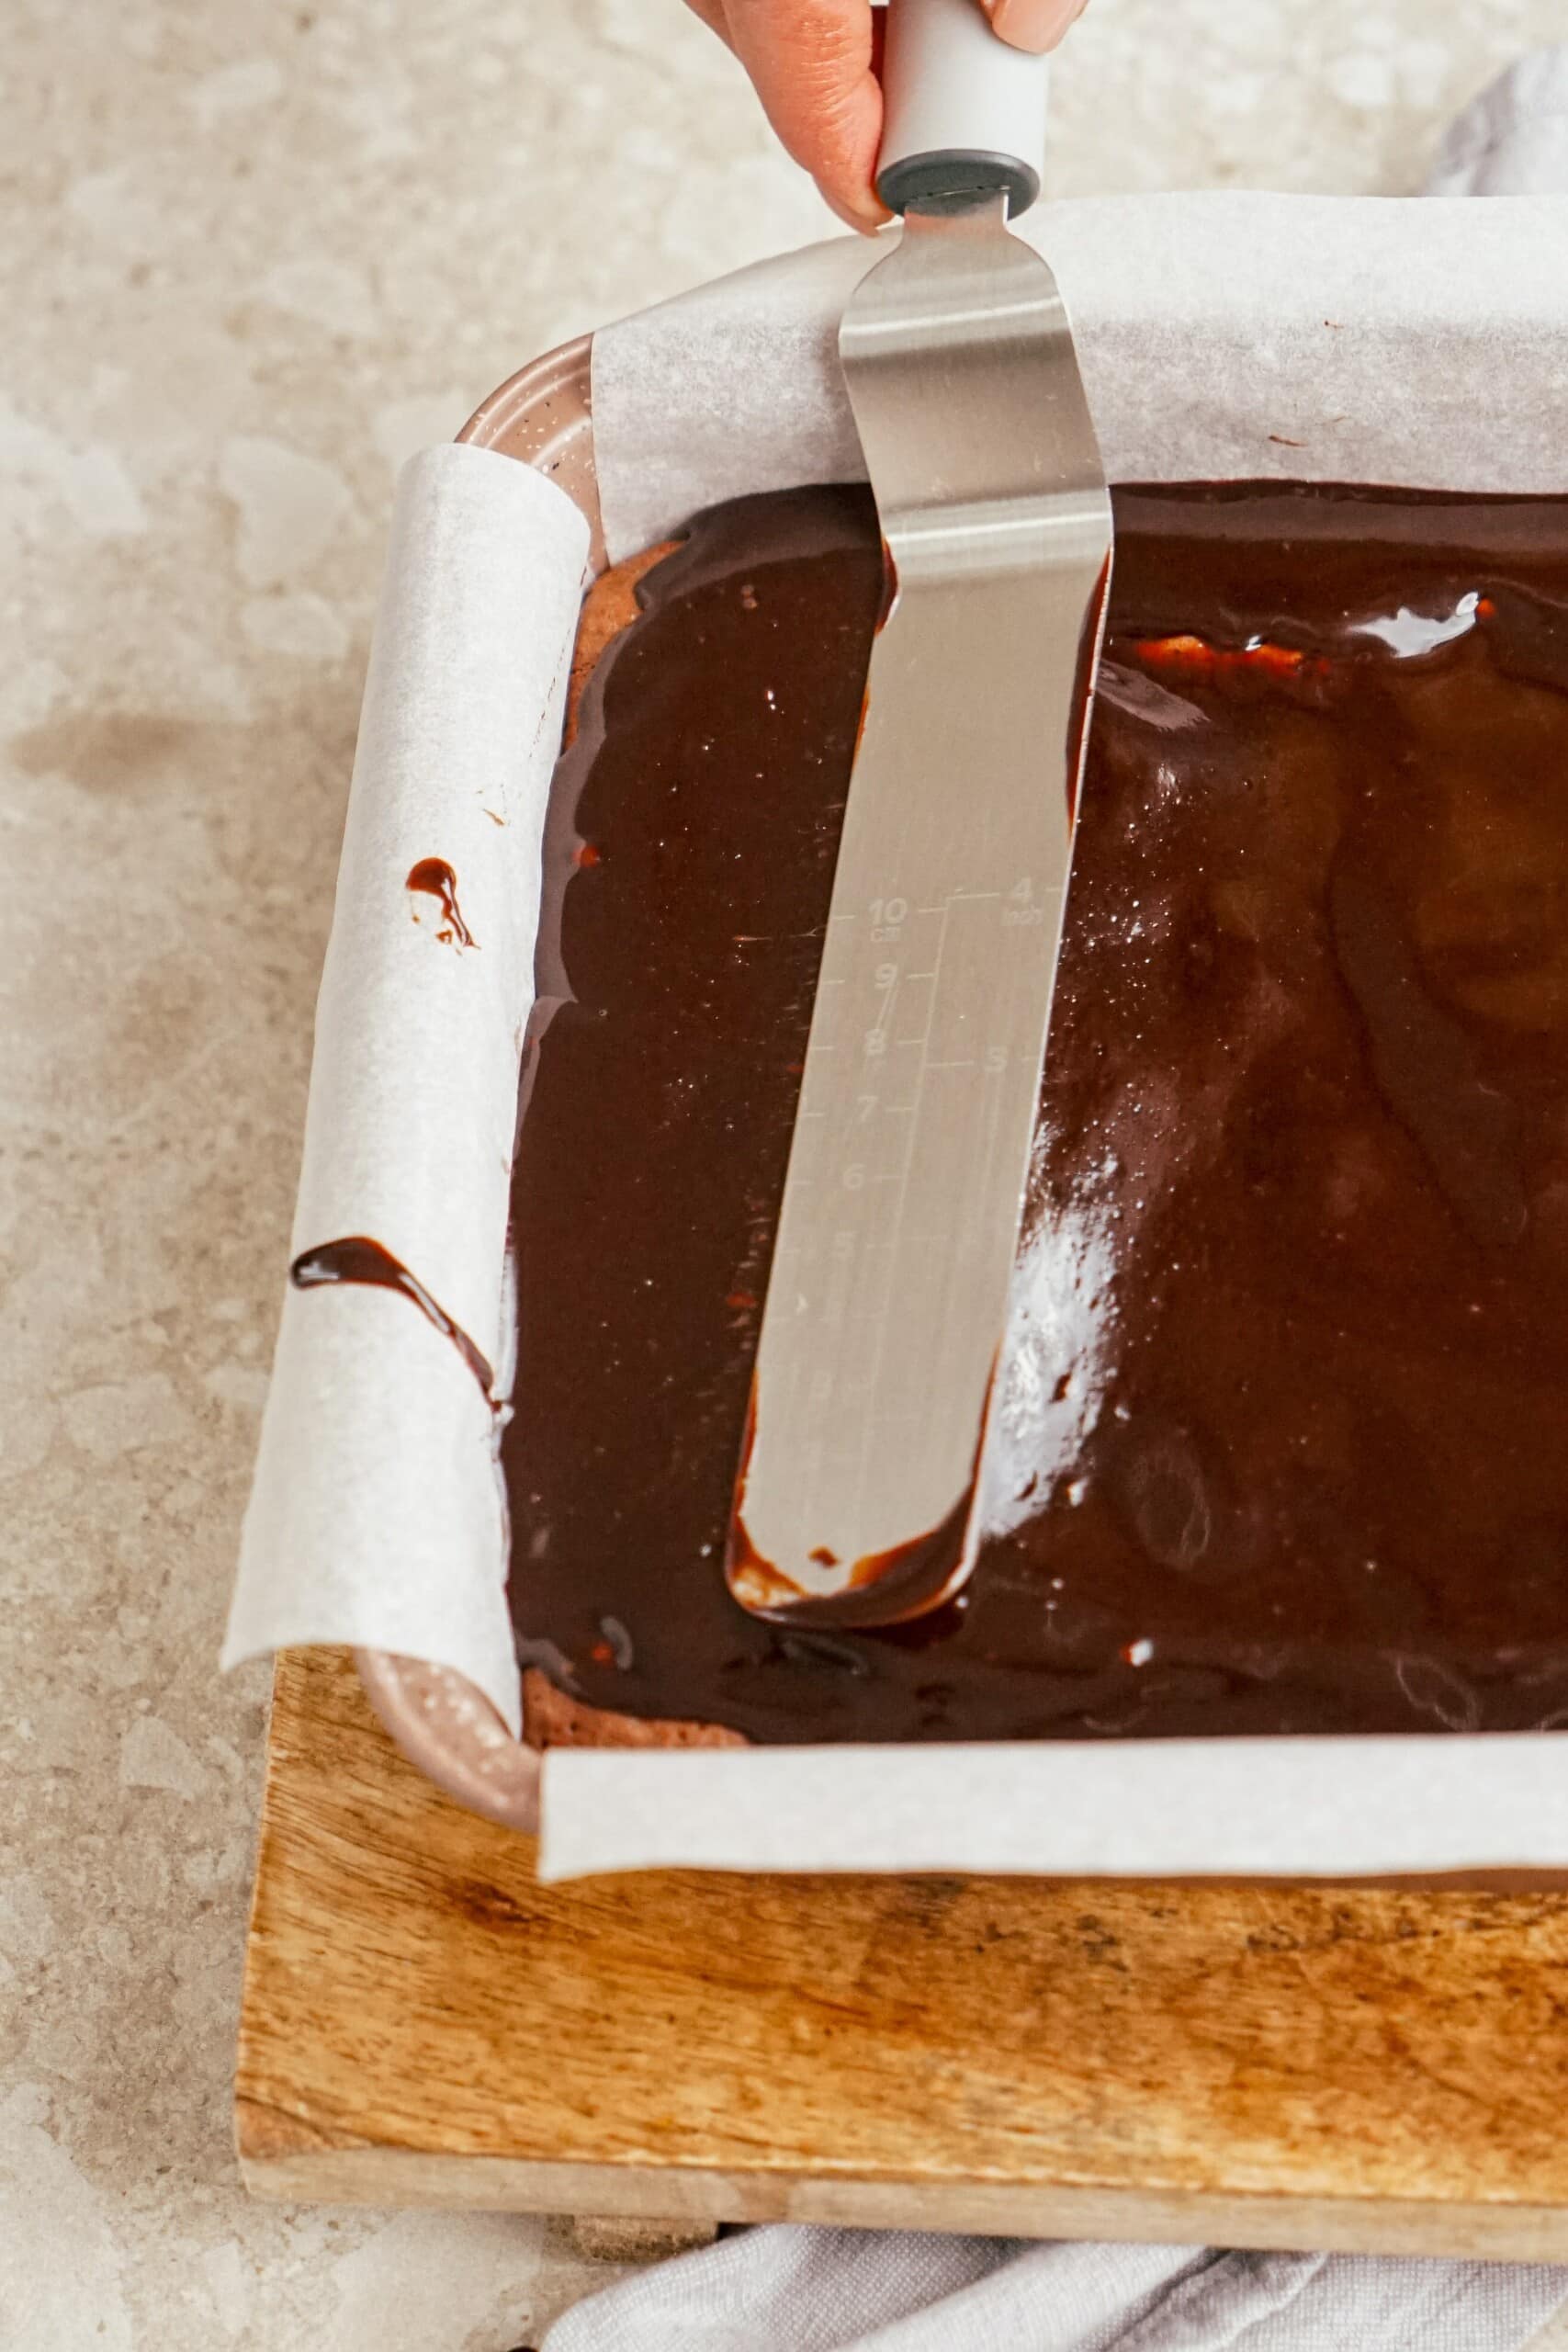 smoothing out hot fudge over brownies with an offset spatula